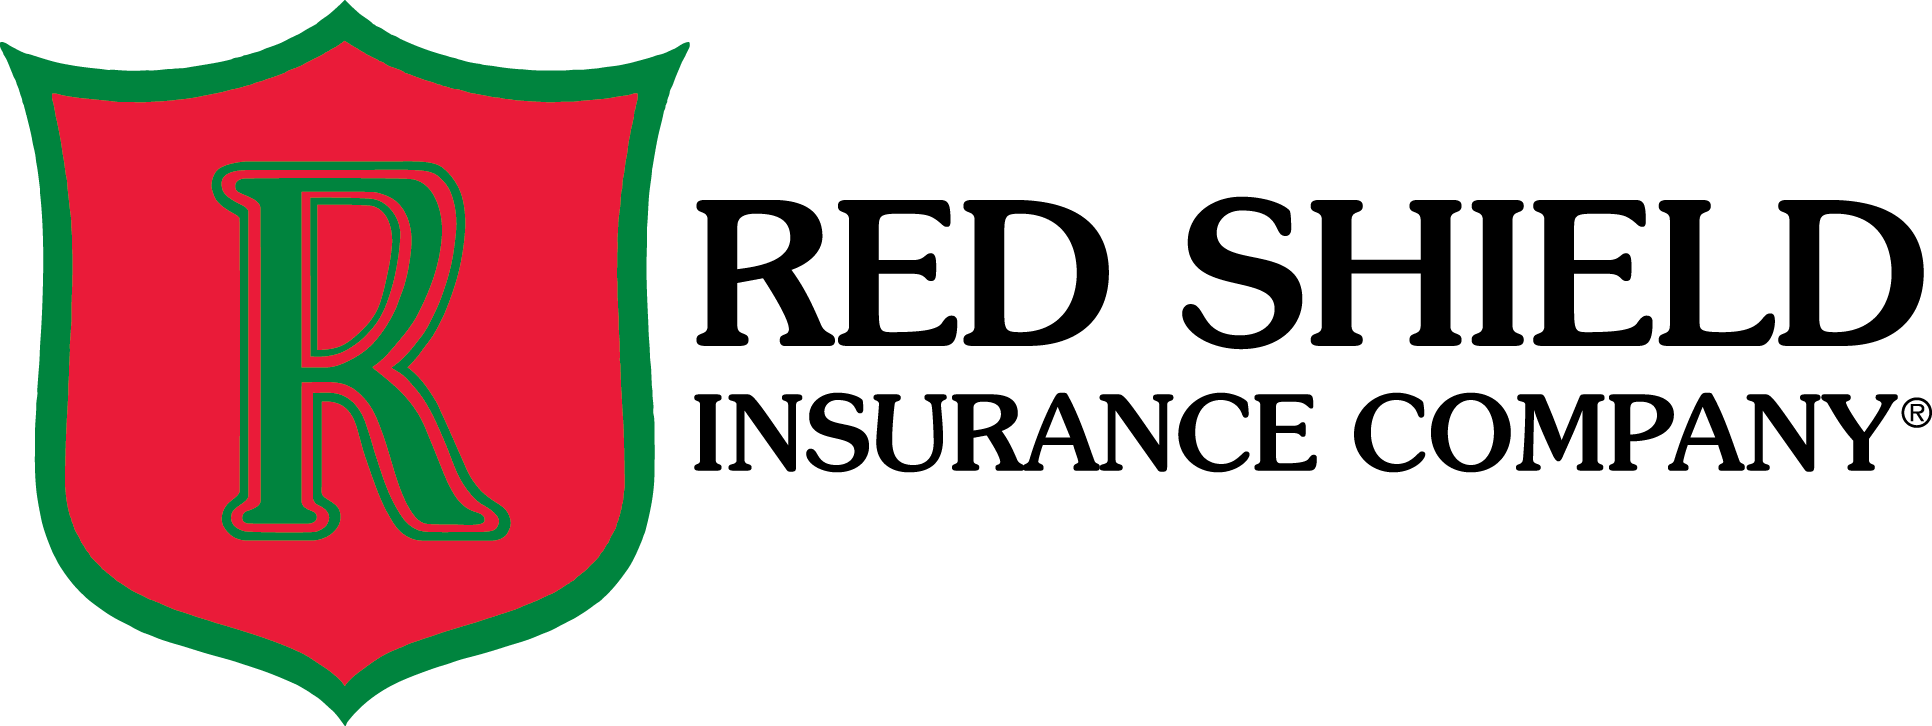 Green and Red Shield Logo - KKlub Members - Professional Insurance Agents Western Alliance